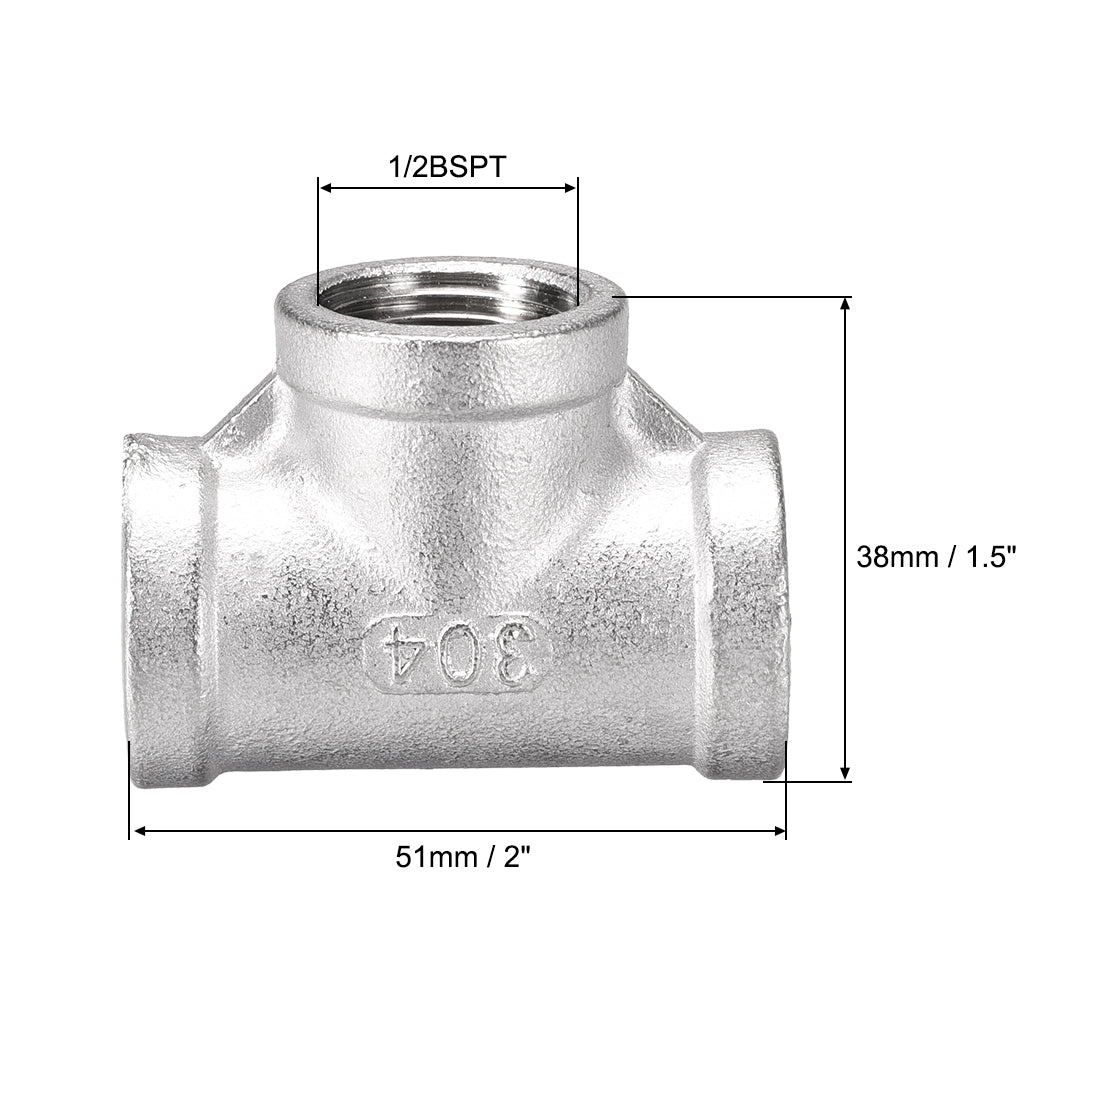 uxcell Uxcell Stainless Steel 304 Cast  Pipe Fitting 1/2BSPT Female Thread Class 150 Tee Shaped Connector Coupler 2pcs